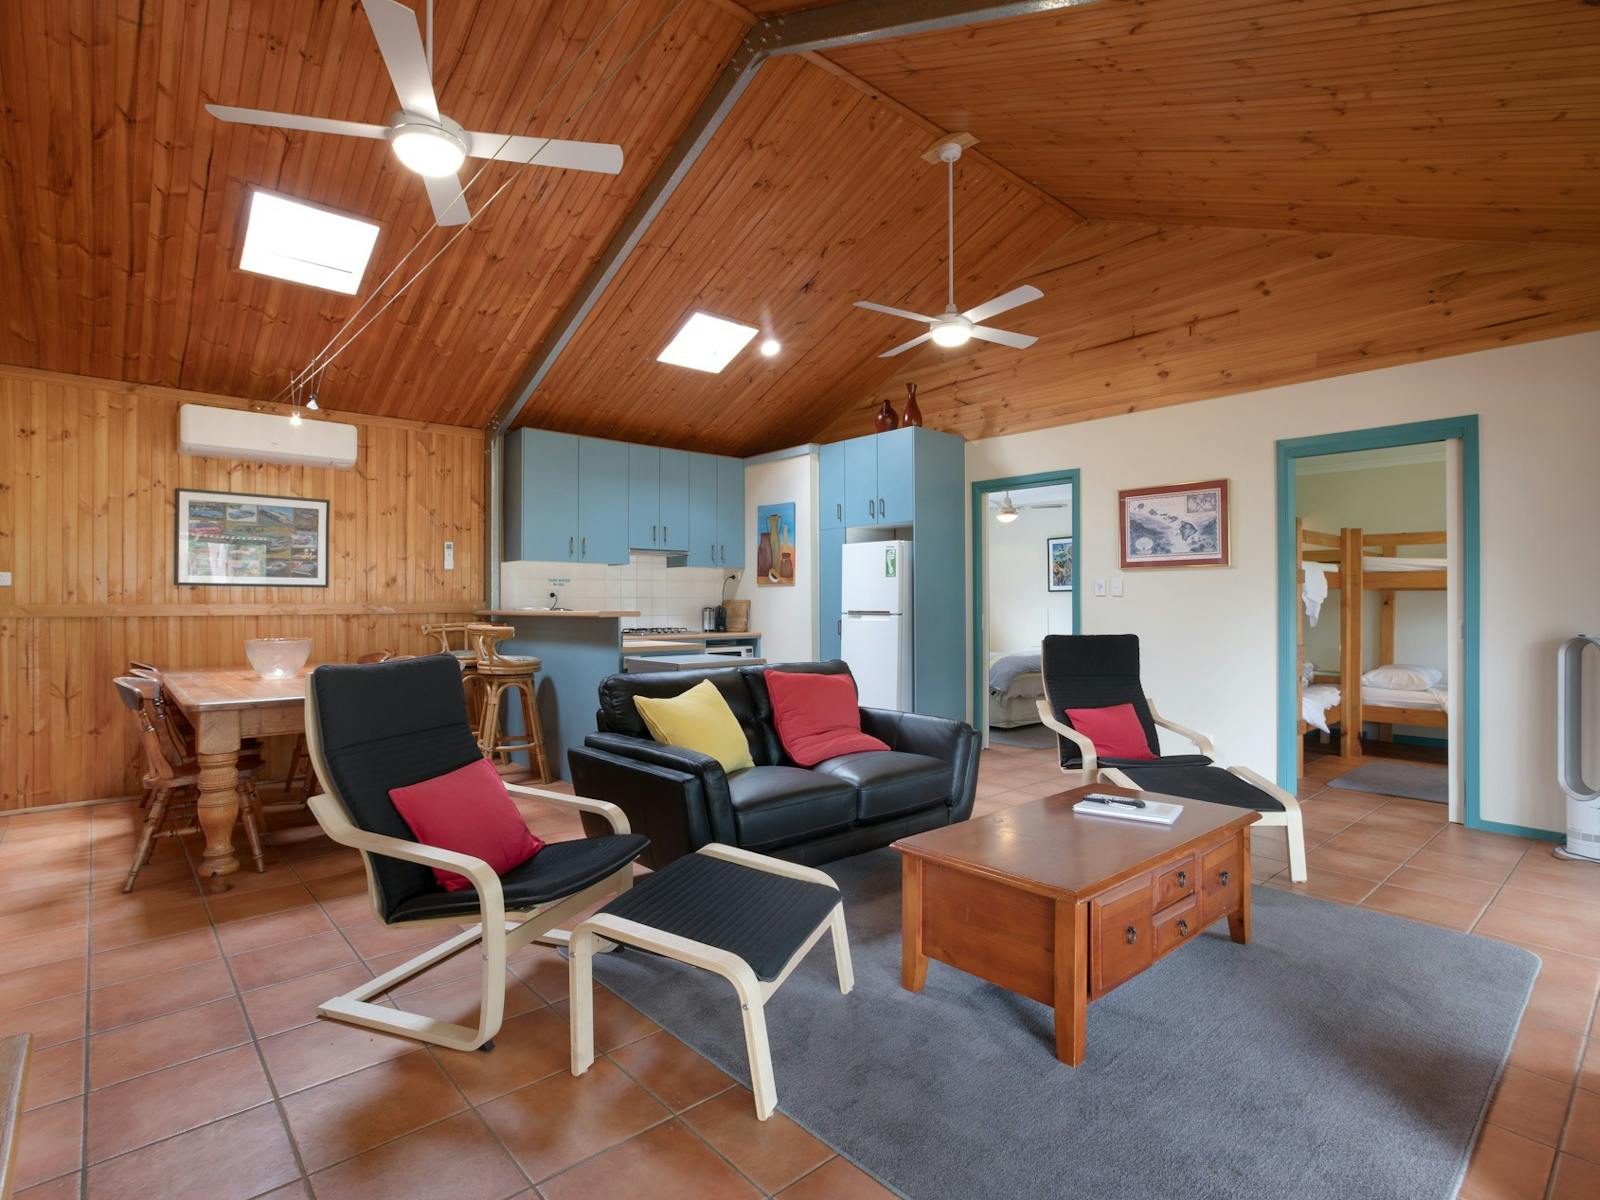 Our largest cottage has plenty of space for the whole family